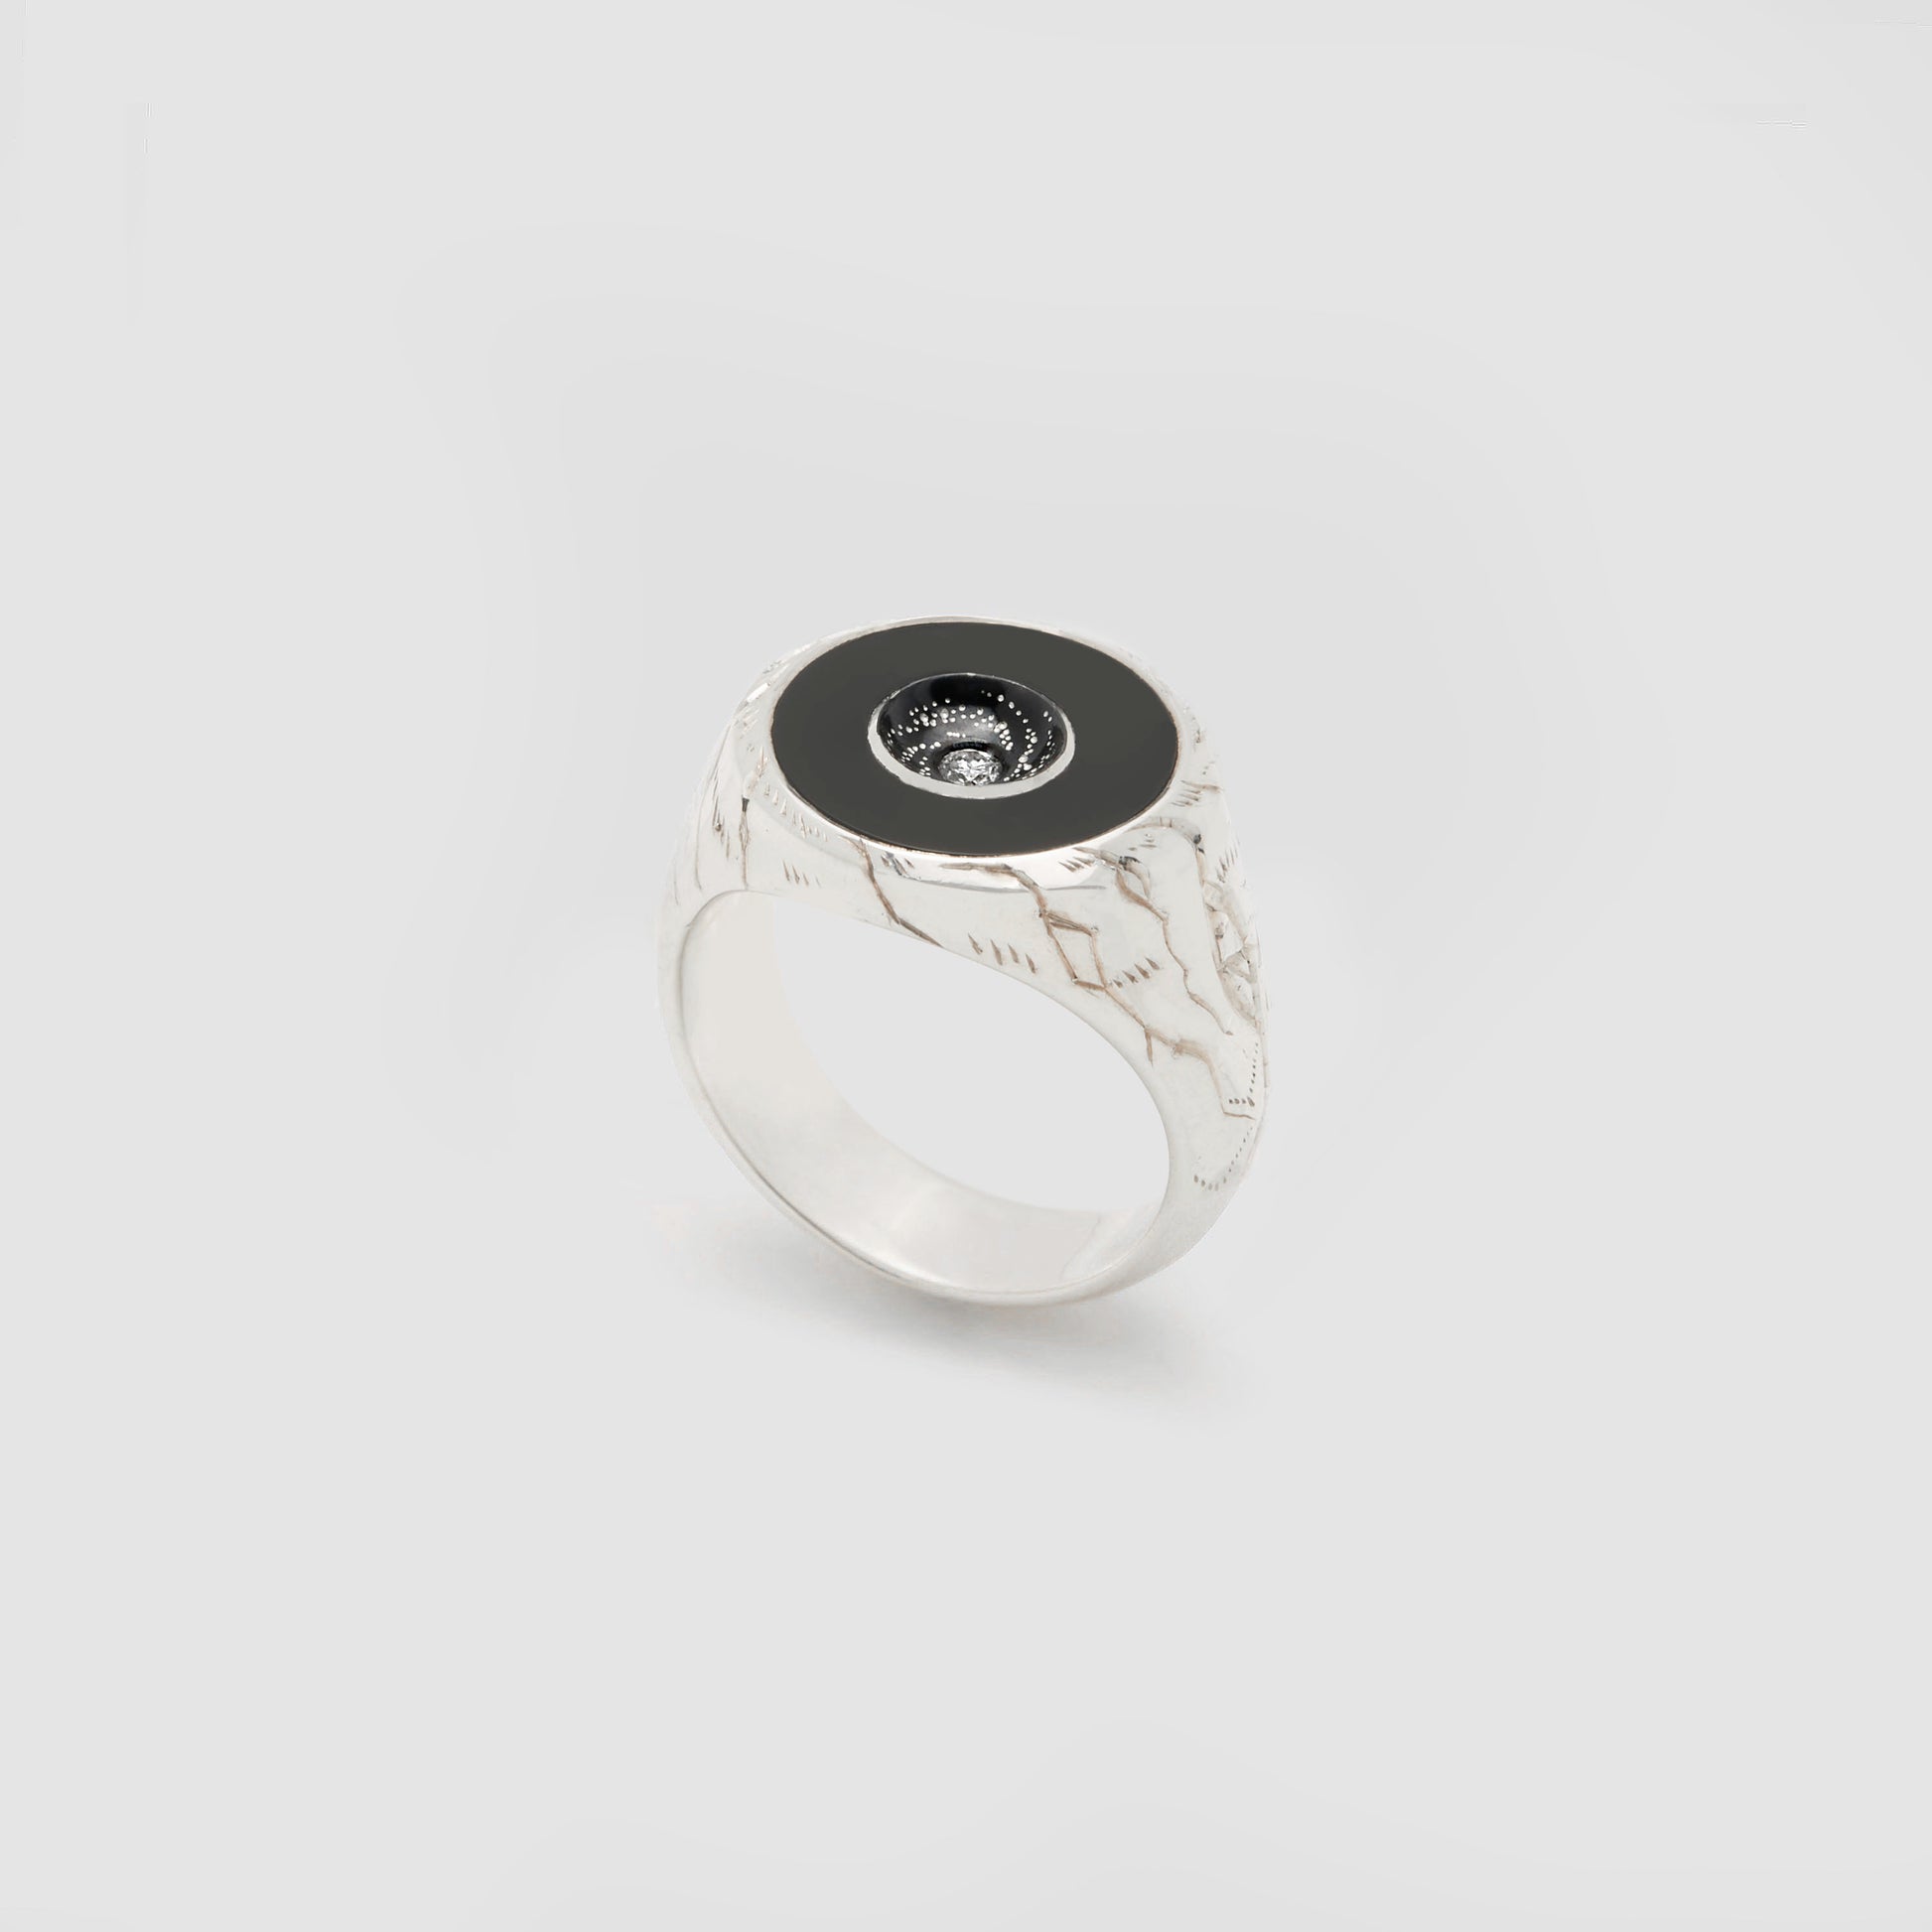 Castro Smith Jewelry Silver Oubliette Signet Ring with Black Onyx Around a Concave Galaxy with a Centre Diamond in Right Side View.